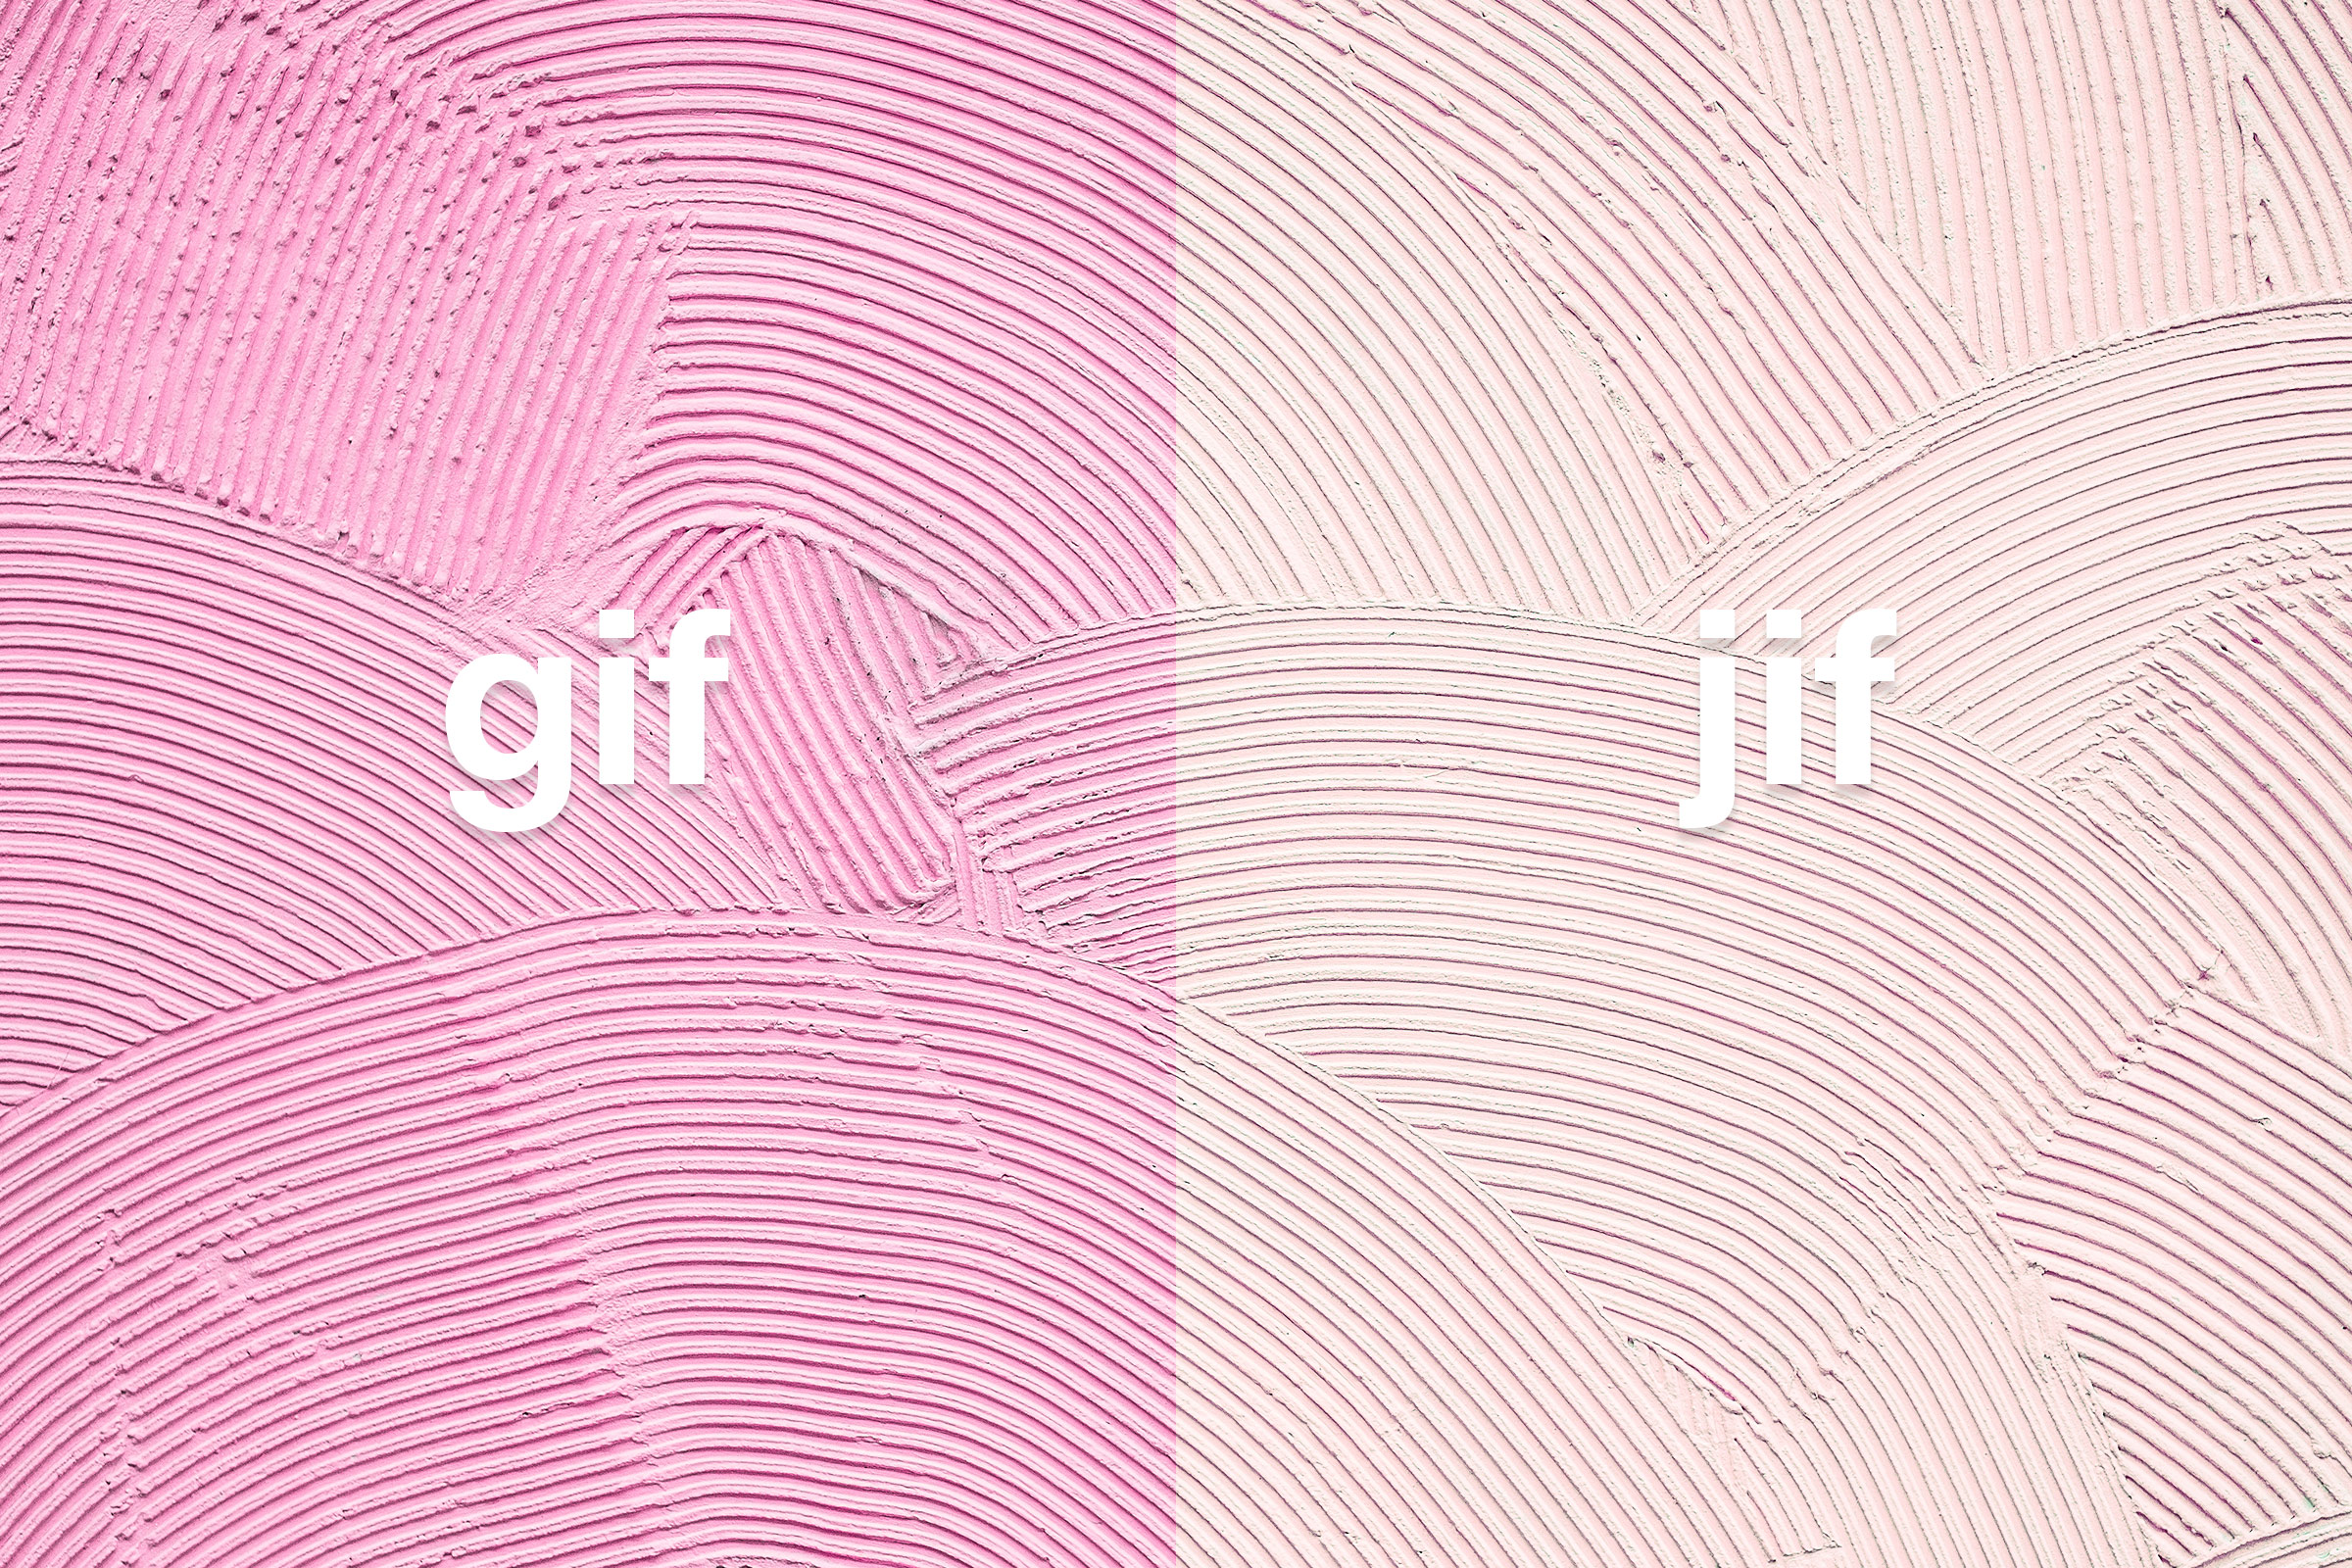 How to pronounce Gif